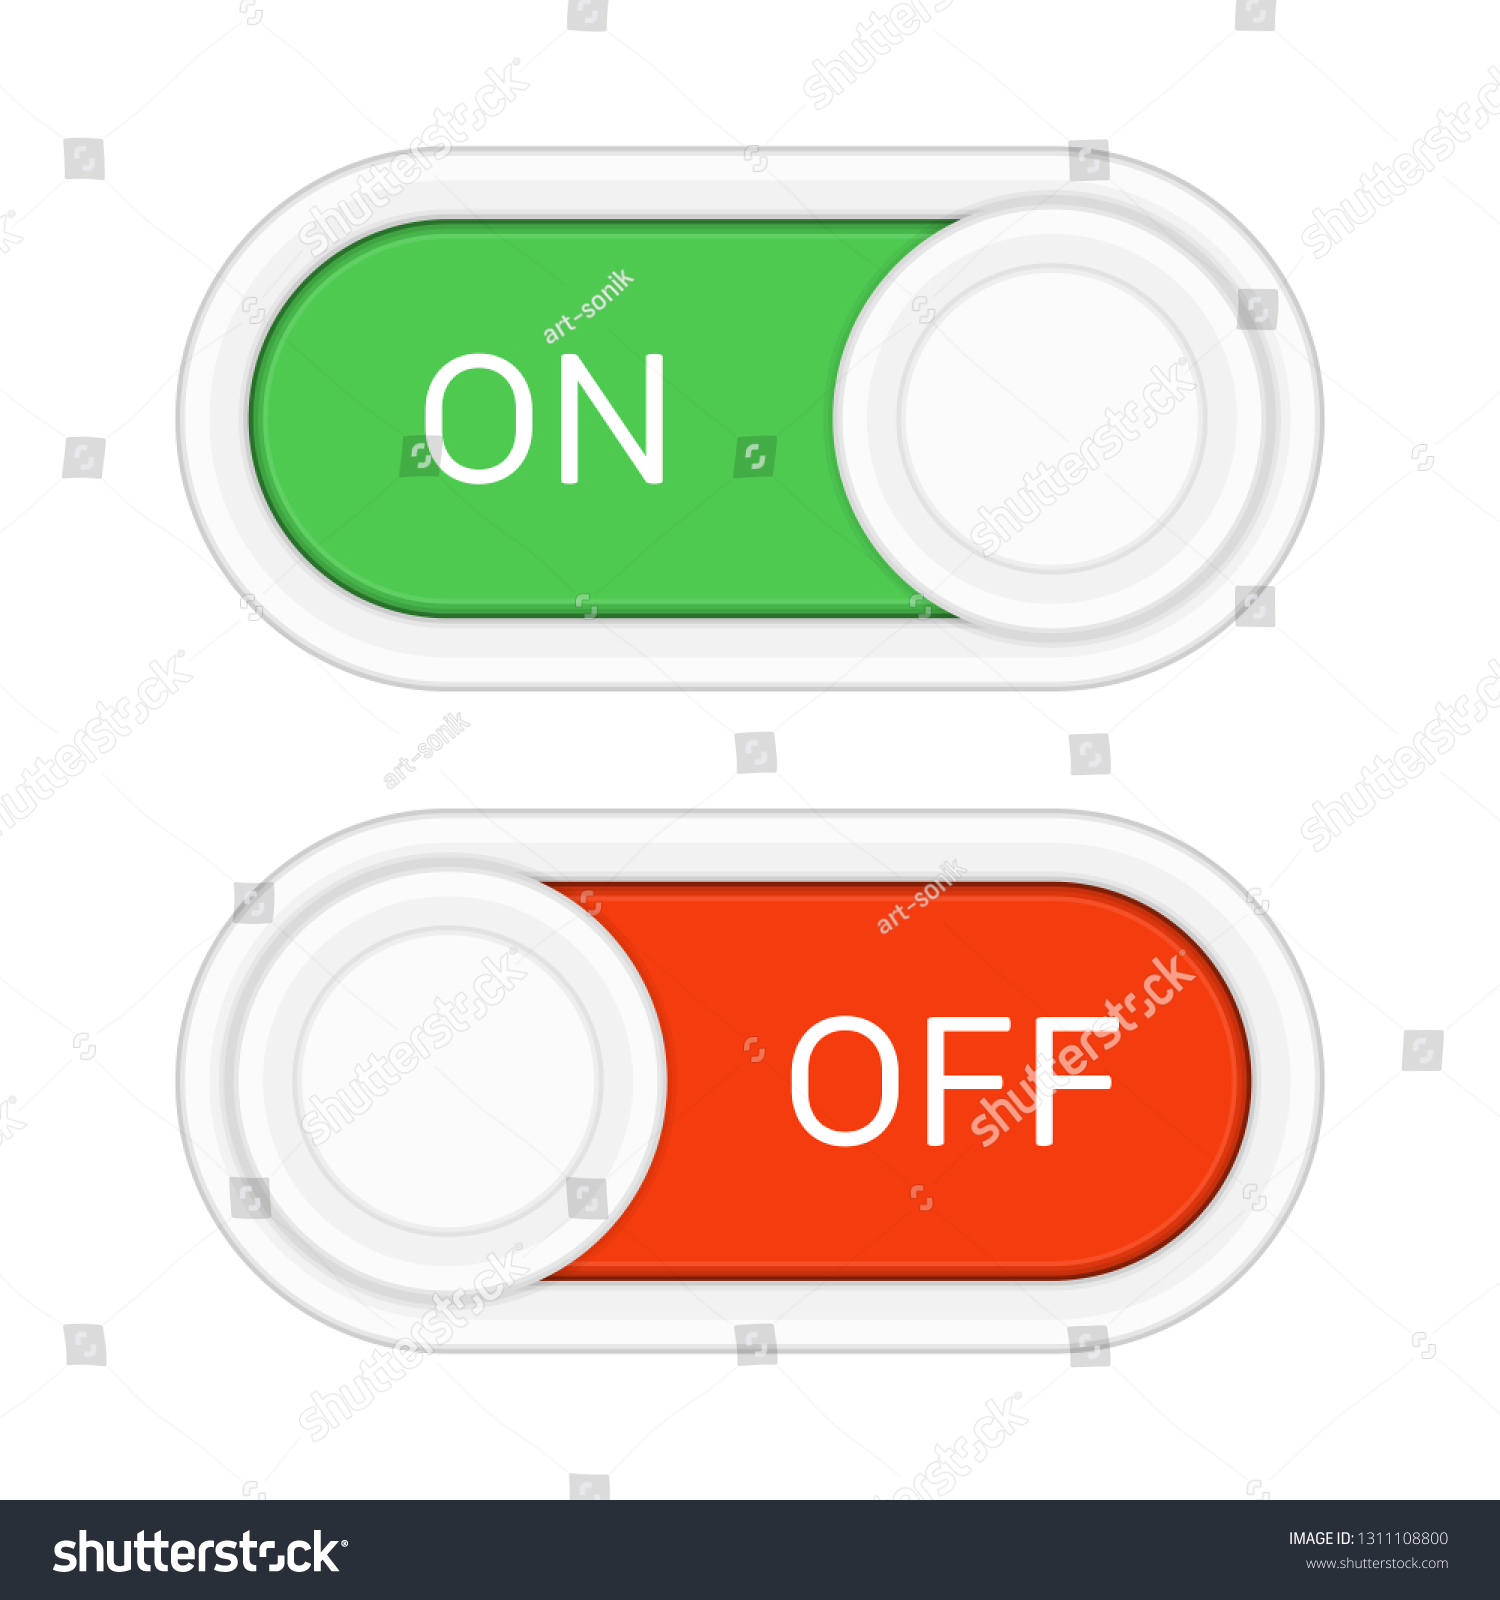 invadere terrorist Indflydelse Toggle Switch Icon On Off Position Stock Vector (Royalty Free) 1311108800